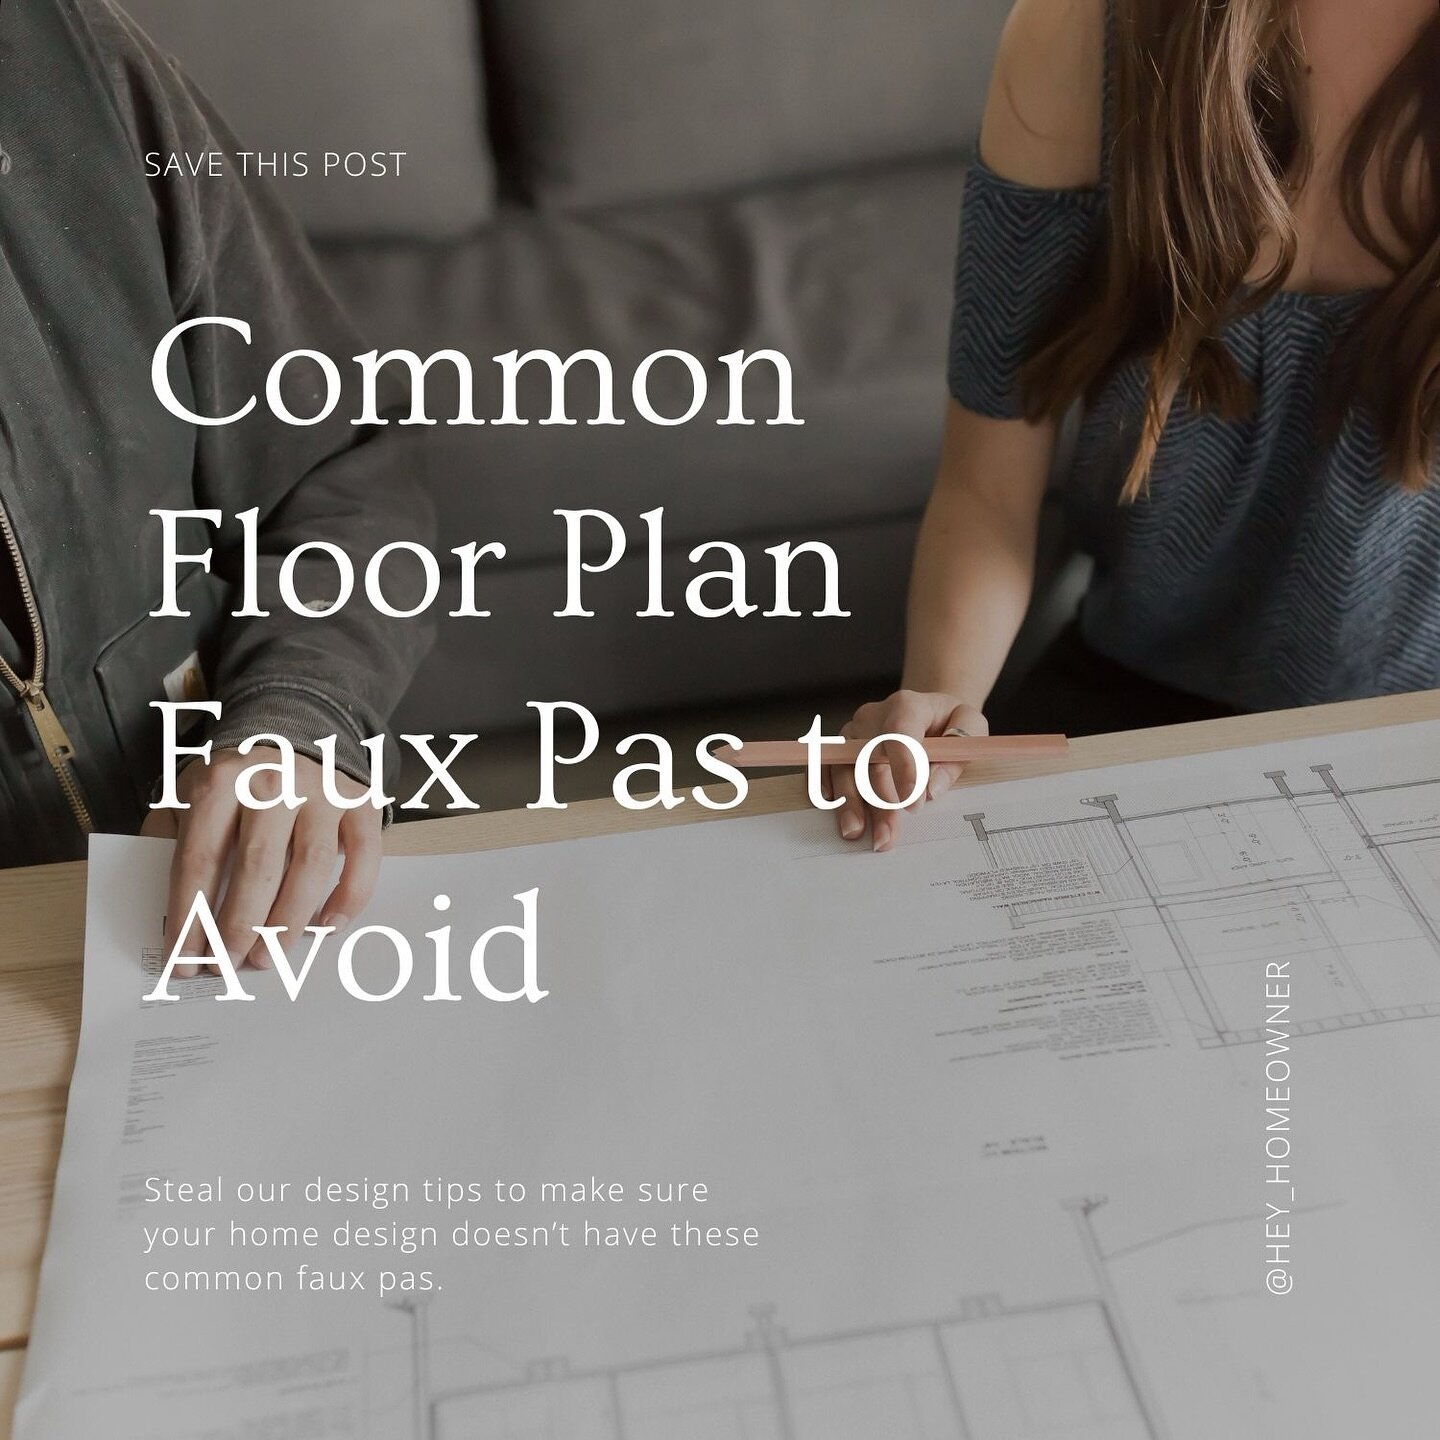 In all fairness there are no right or wrong ways to design a home that suits you and your family, but there are a lot of faux pas that I&rsquo;ve seen over nearly 2 decades of designing homes. 

Sure, you could live with them, but would you want to? 